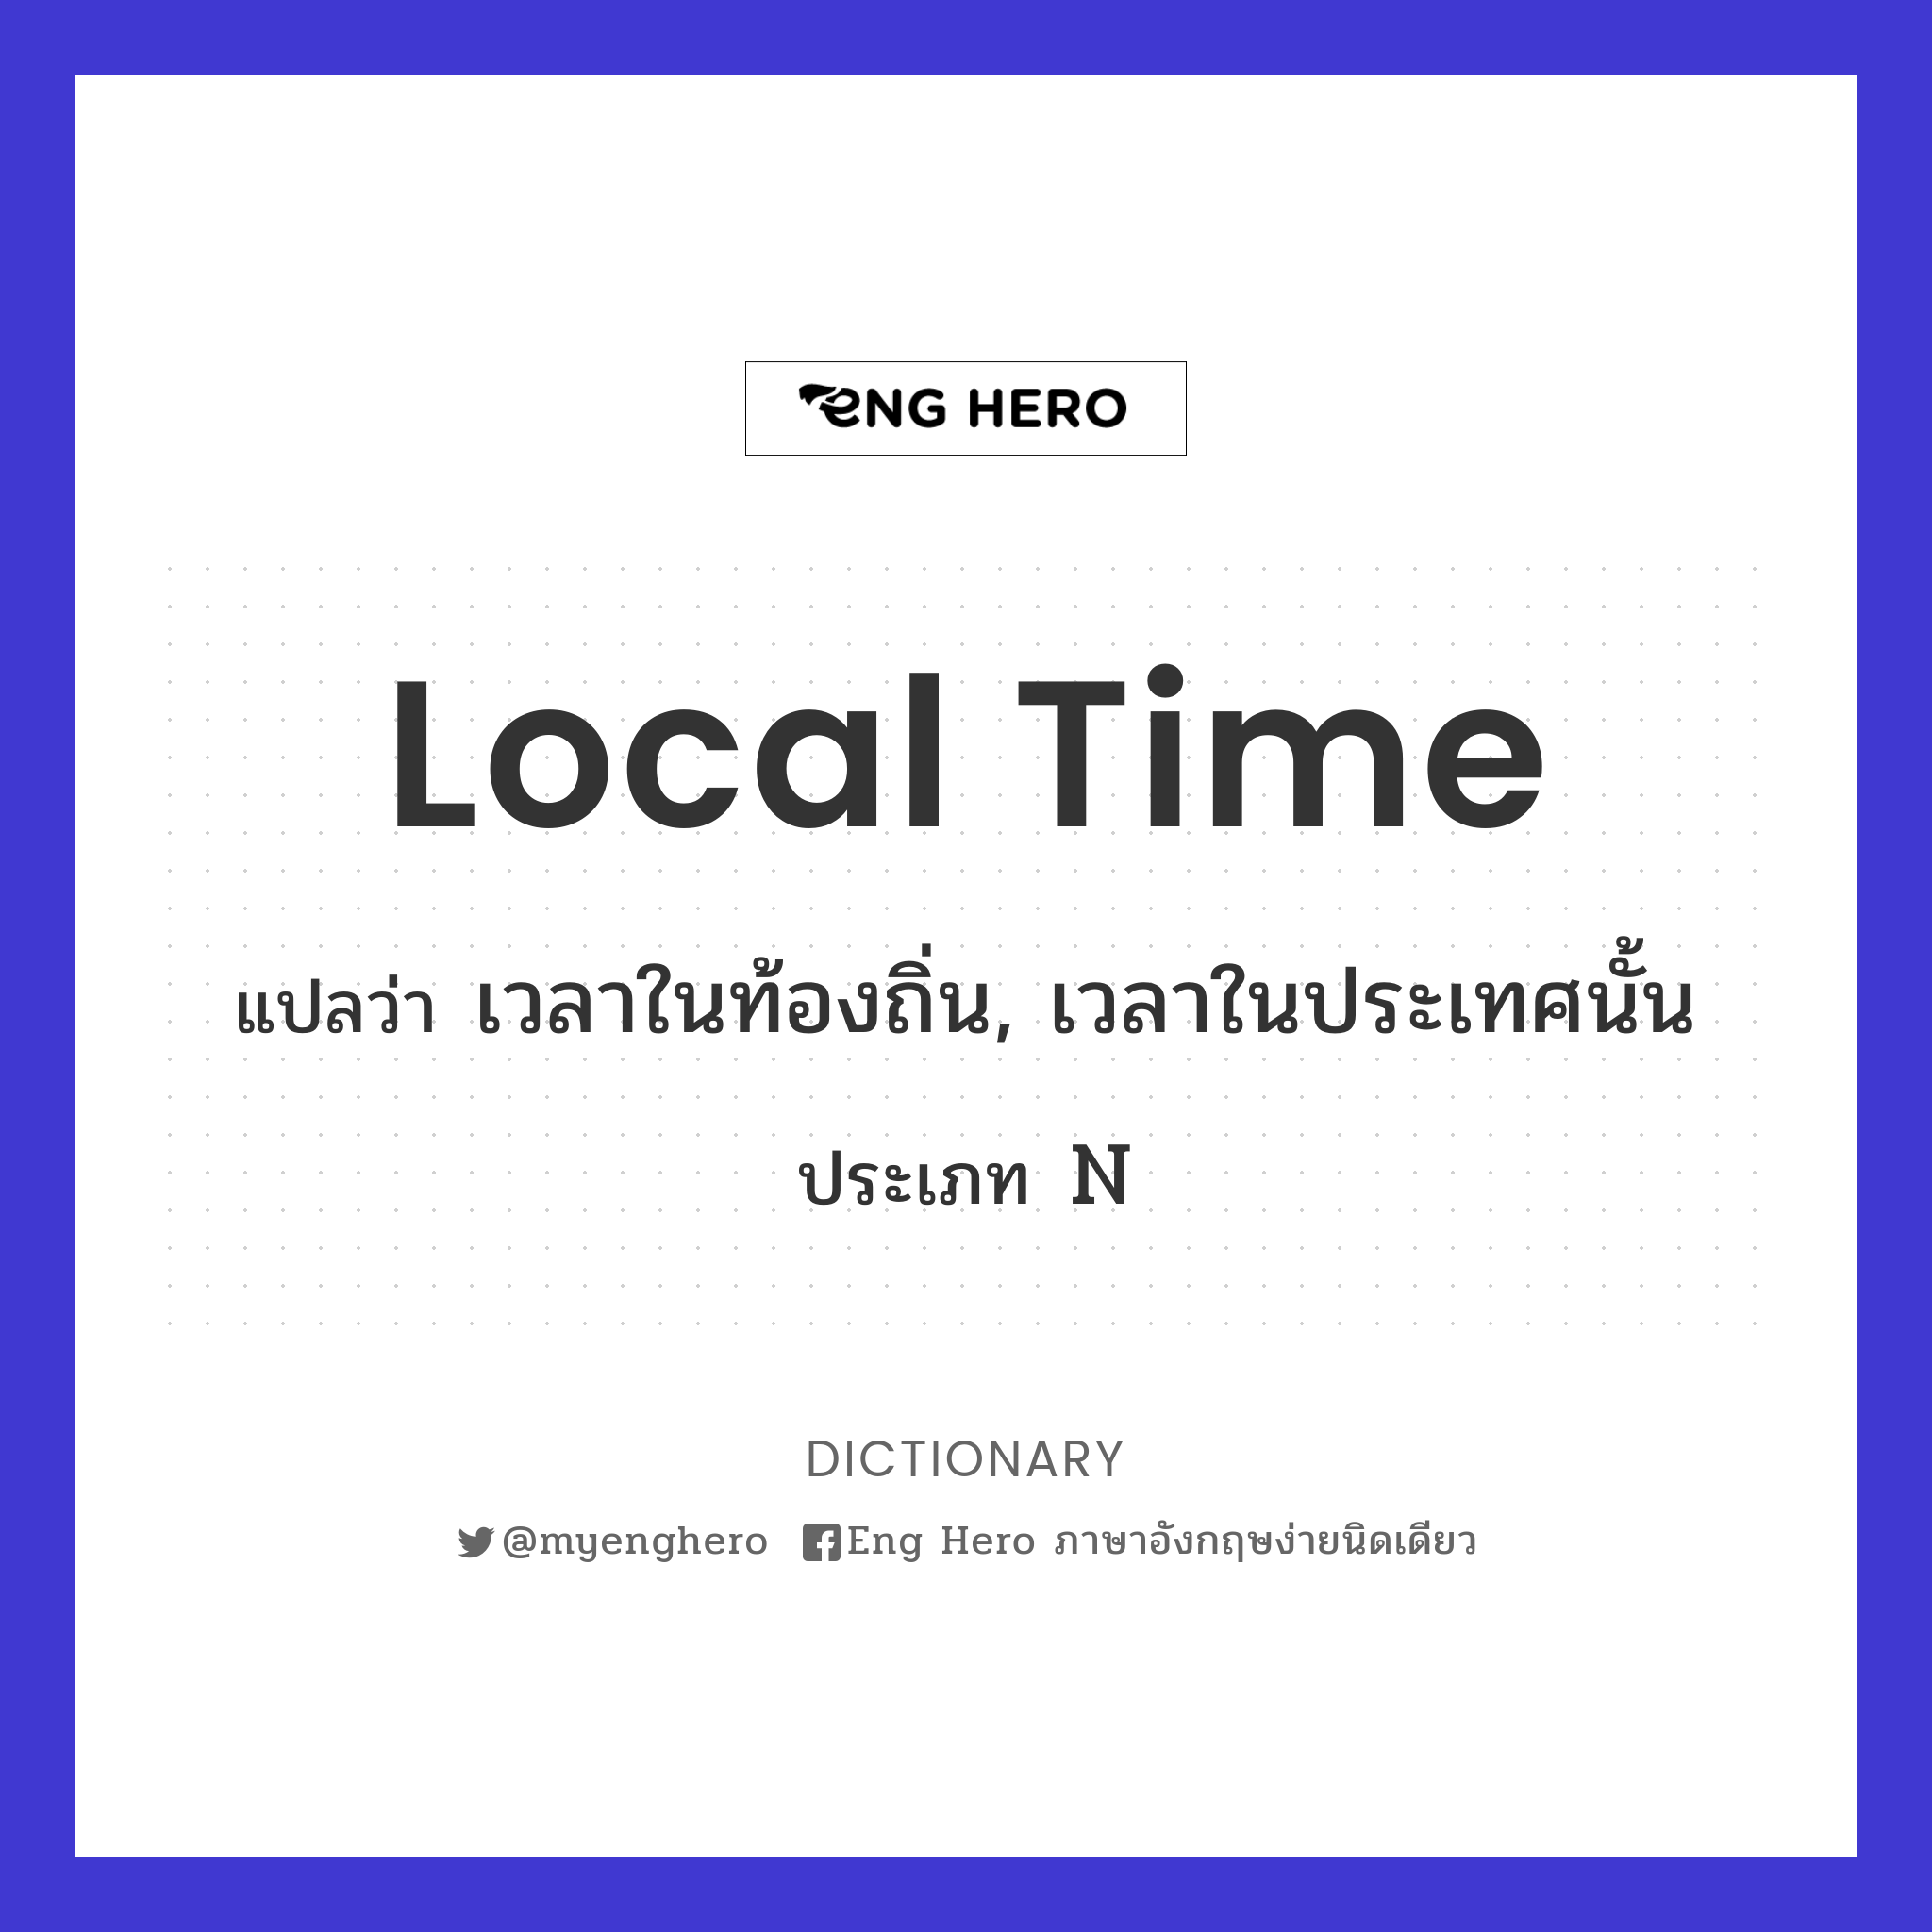 local time